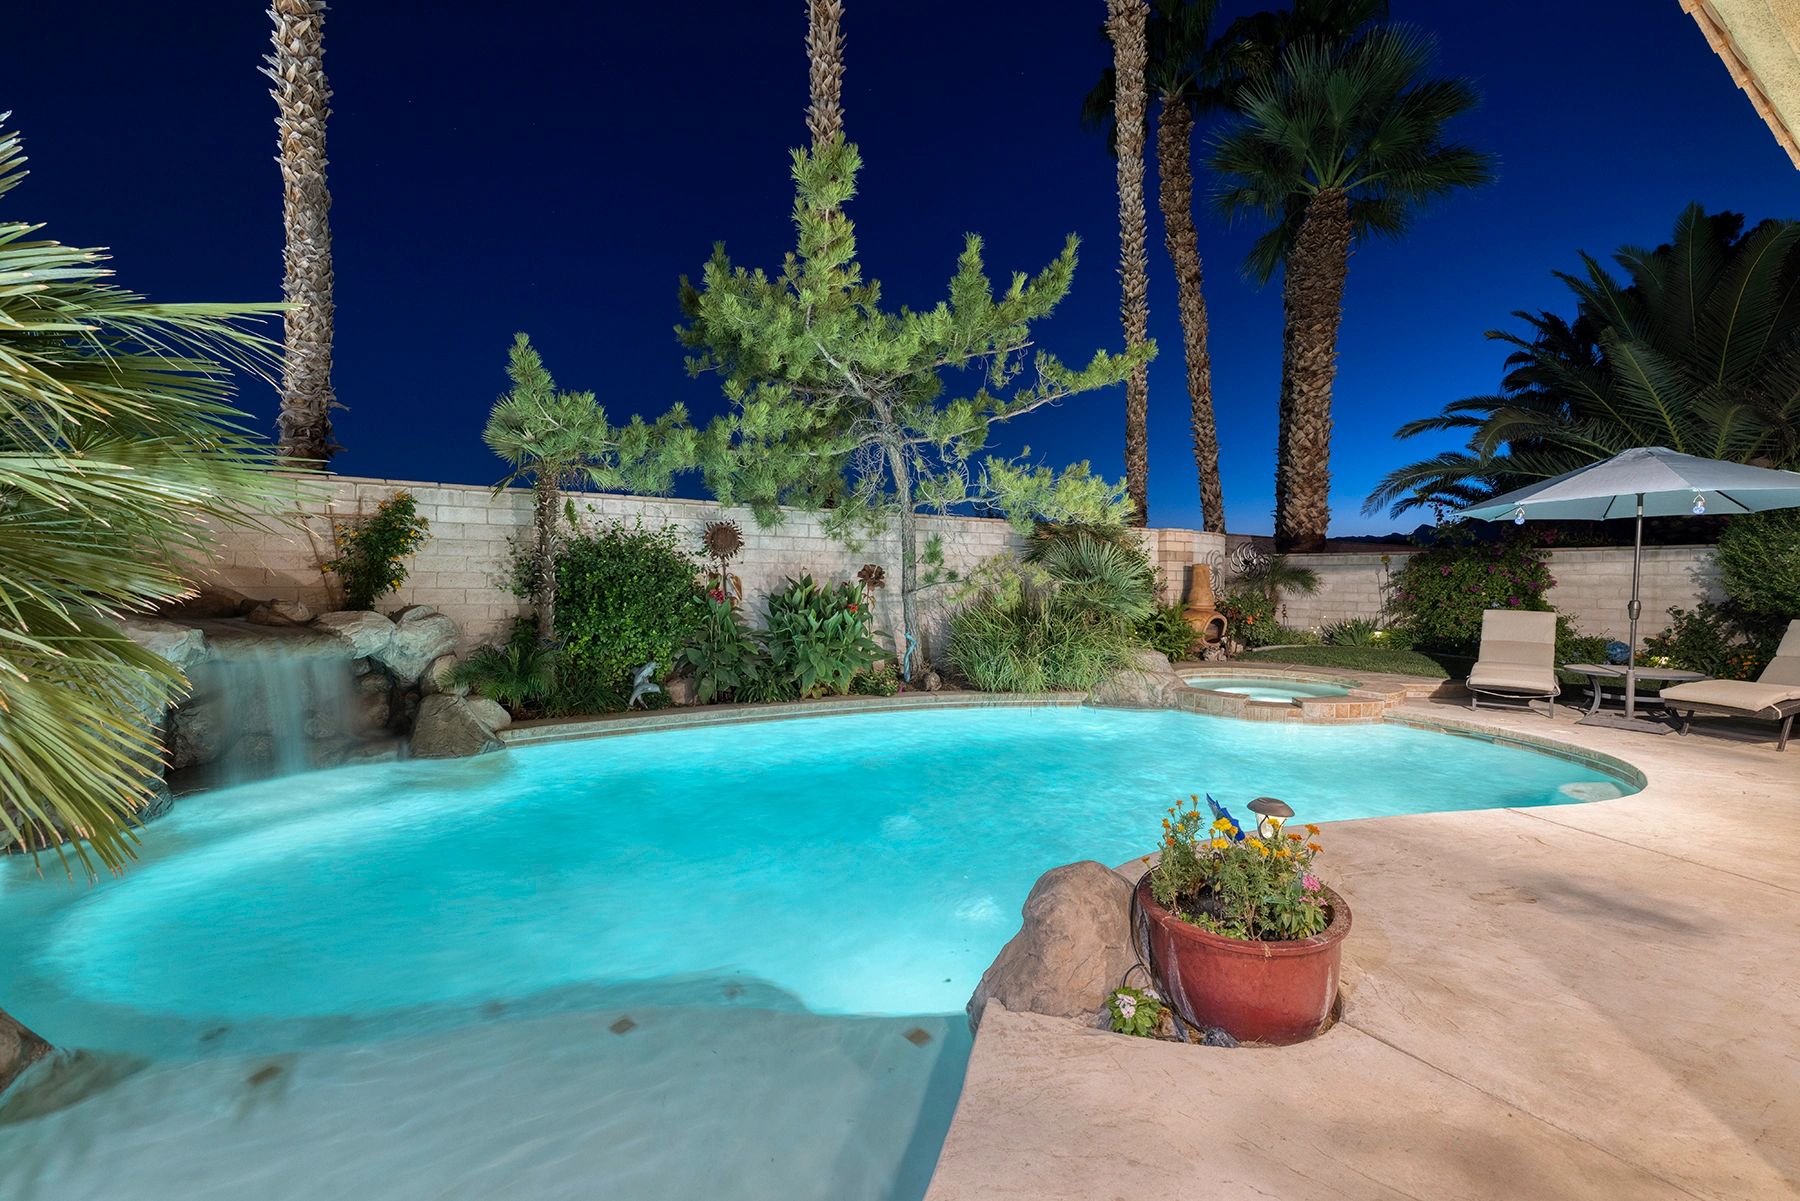 Lighted backyard pool at night showing pool deck propety privacy wall spa plants palm trees